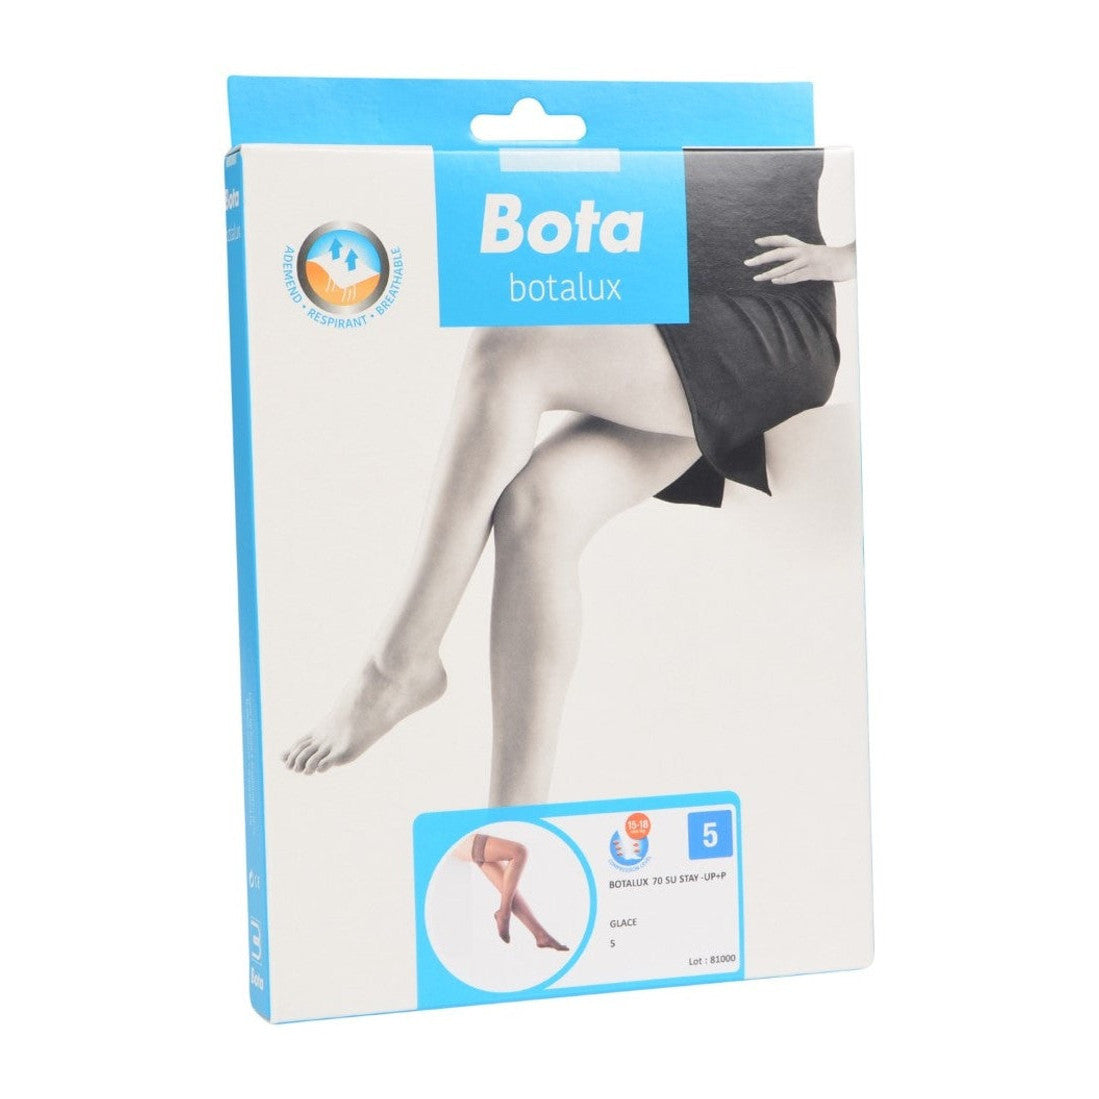 Botalux 70 Stay-up+p su glace